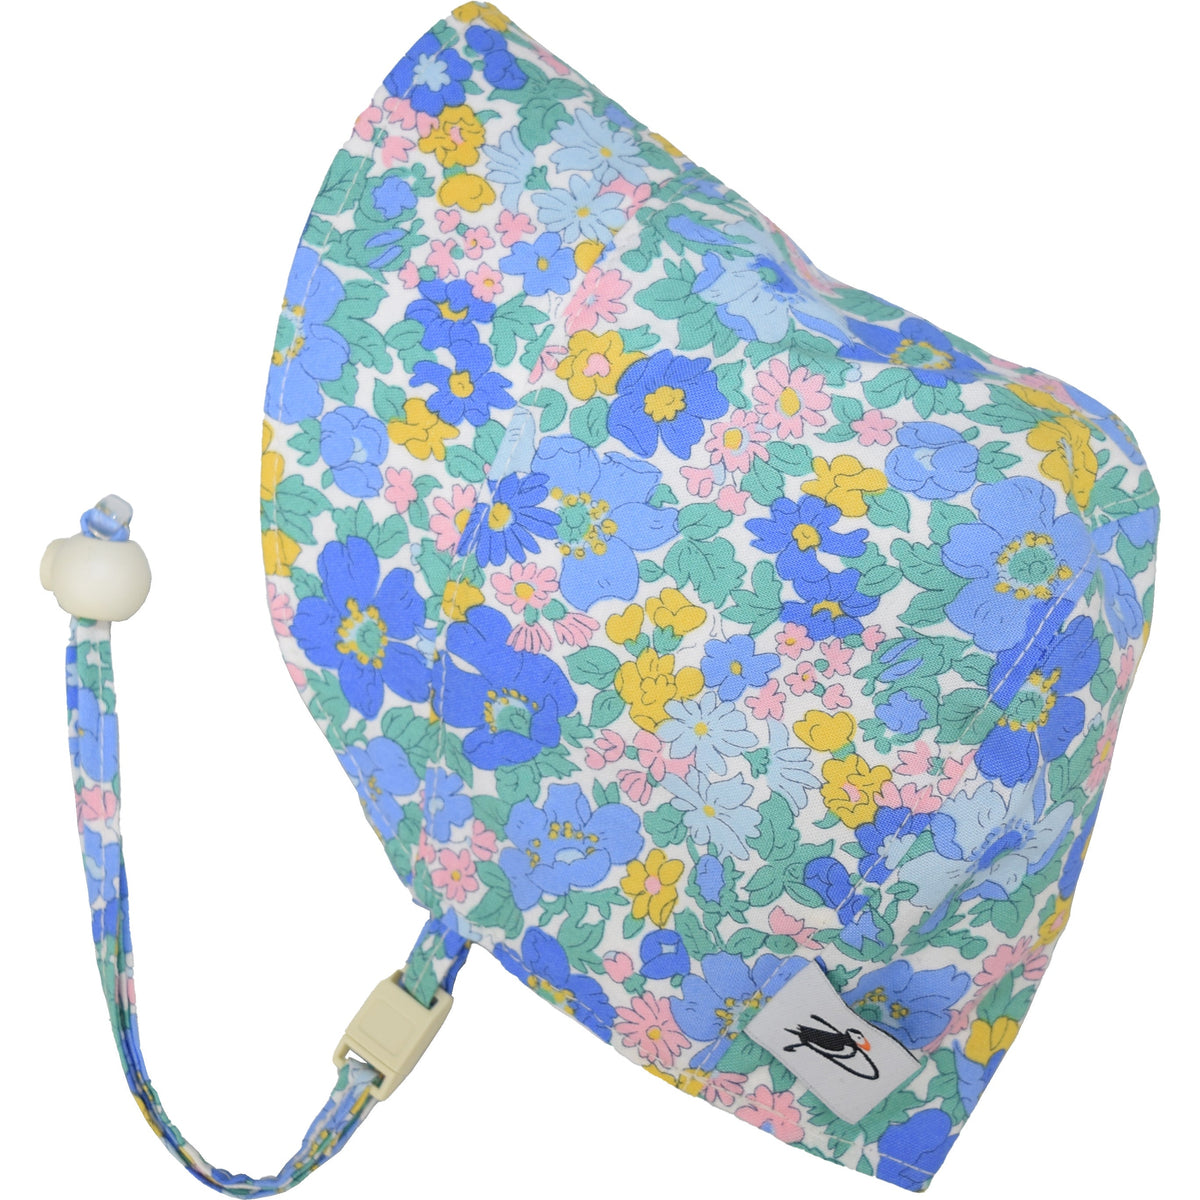 Infant and Toddler Sun Protection  Summer Bonnets with UPF50 Sun Protection. A chin tie with toggle and break away clip keep bonnet safely on head. Made in Canada by Puffin Gear -Liberty of London Cosmos Flower Print